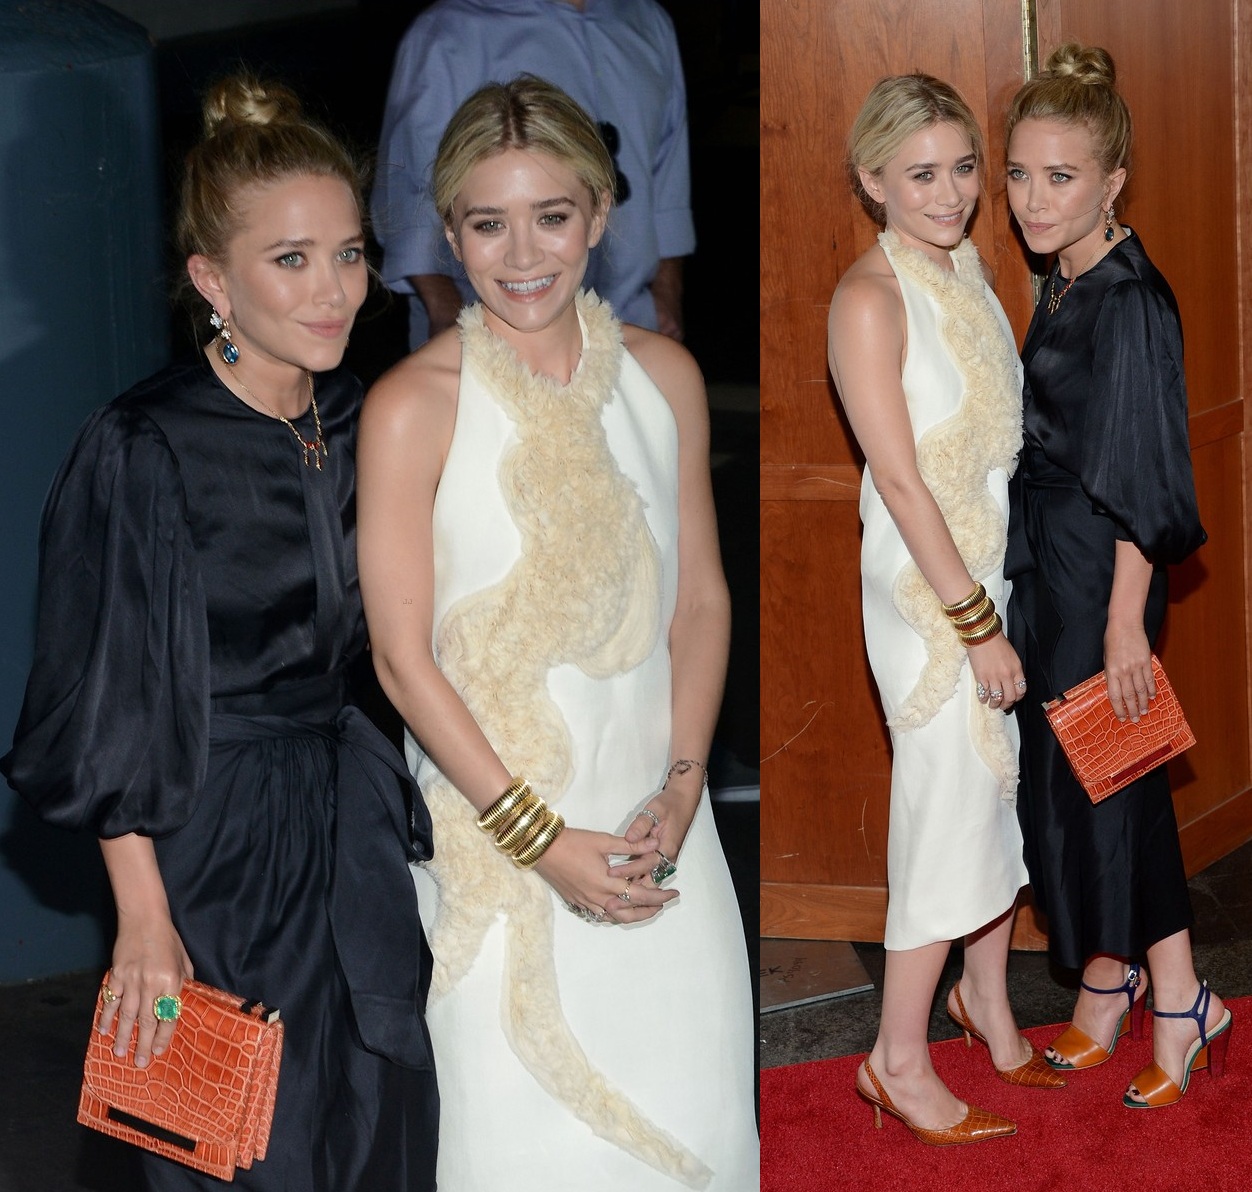 http://2.bp.blogspot.com/-32_uebfO5E0/T8knCufsf_I/AAAAAAAAKLQ/Ml5OLb9tc5g/s1600/Mary-Kate+&amp;+Ashley+Olsen+in+The+Row+-+The+Fresh+Air+Funds+Salute+To+American+Heroes.jpg